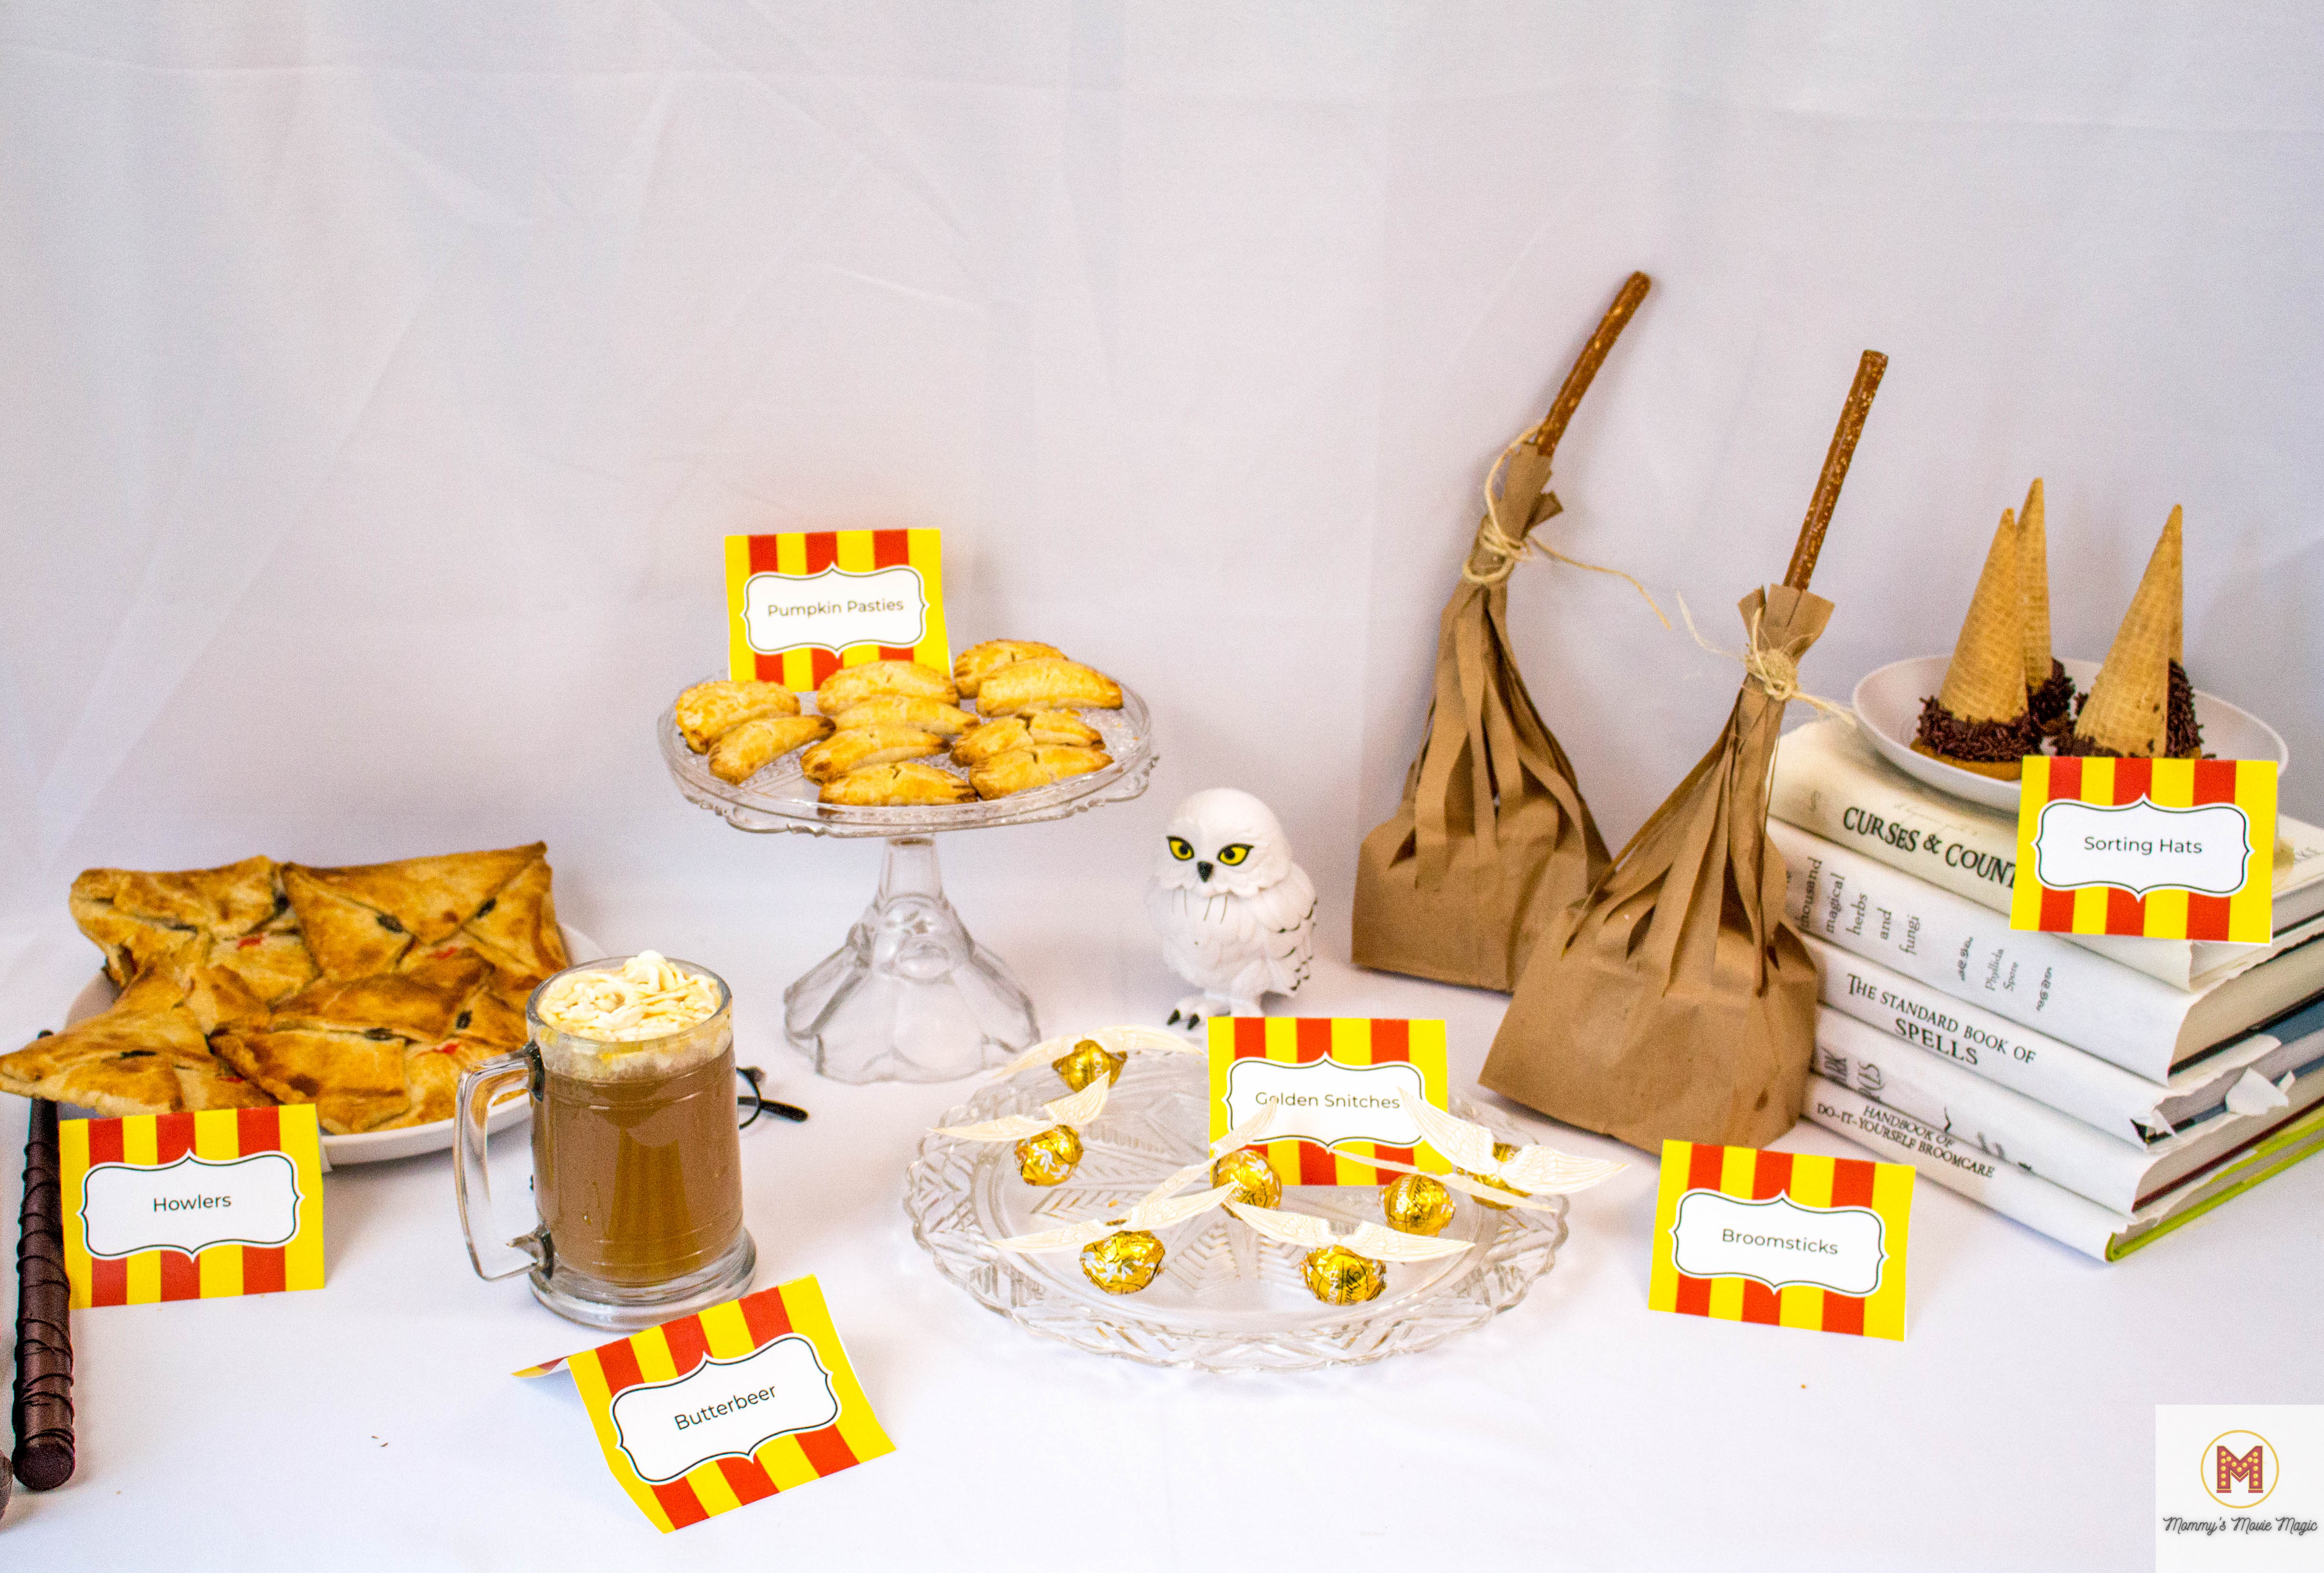 Throw a Harry Potter-themed holiday party with these treats